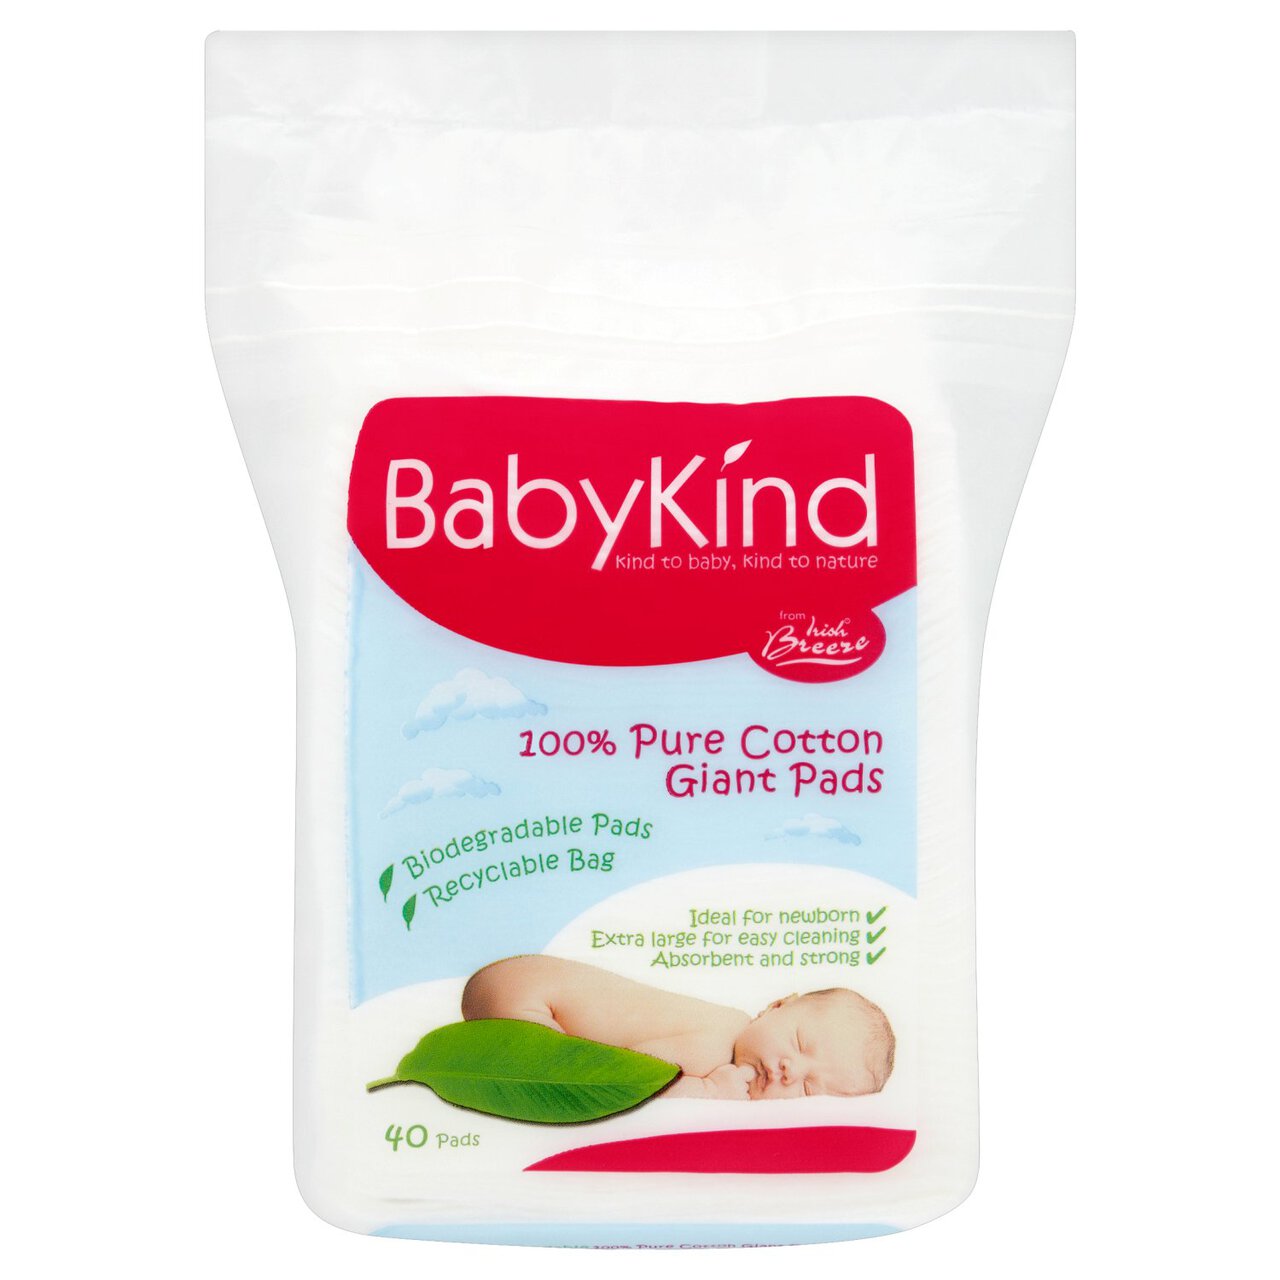 Babykind Giant Cotton Pads 40 per pack